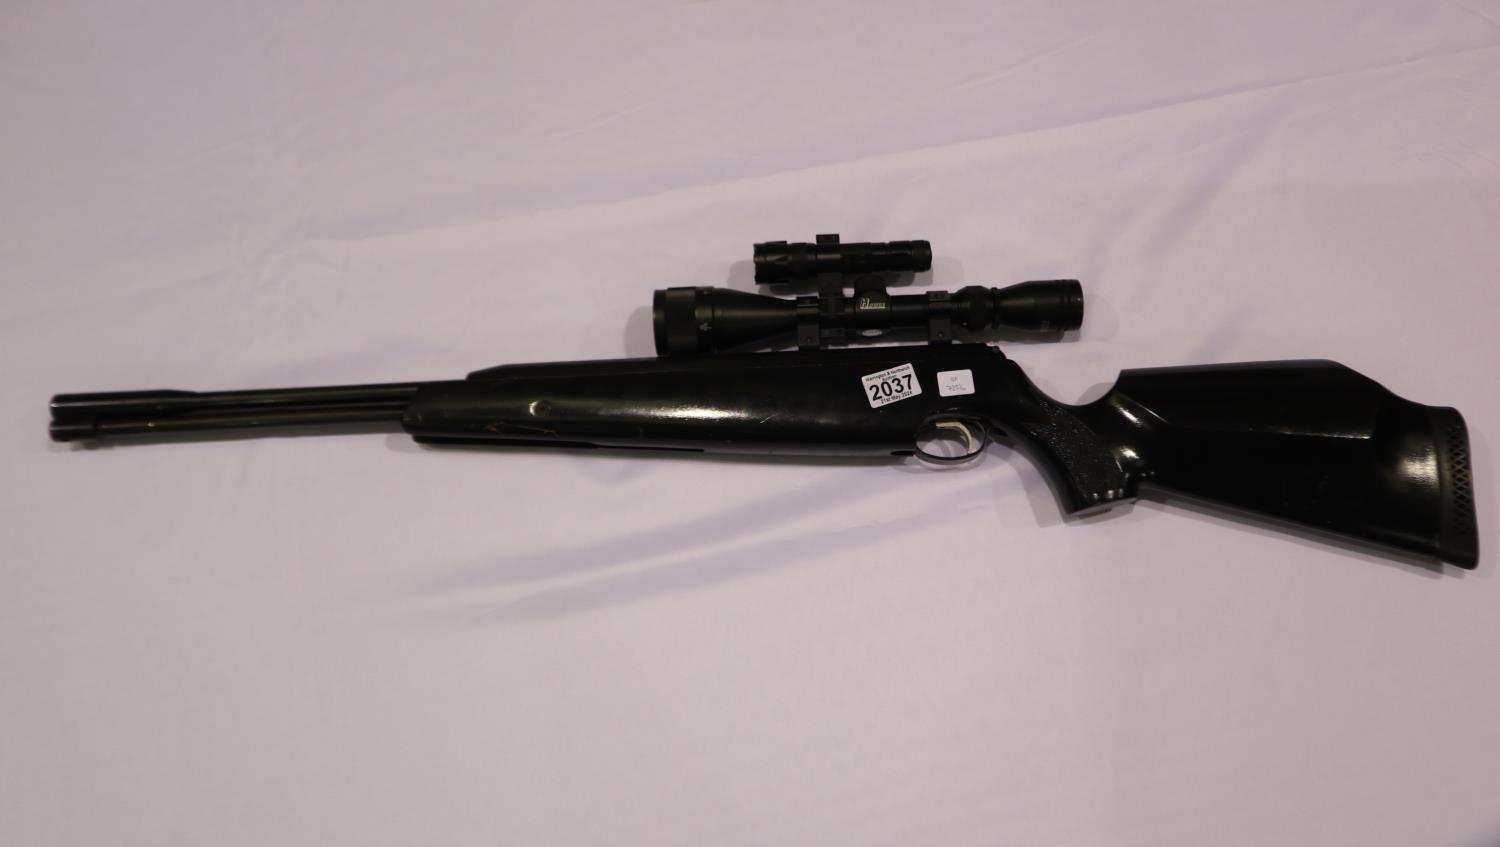 Air Arms TX200 .22 with Hawke scope and ultra fire gun light. UK P&P Group 2 (£20+VAT for the